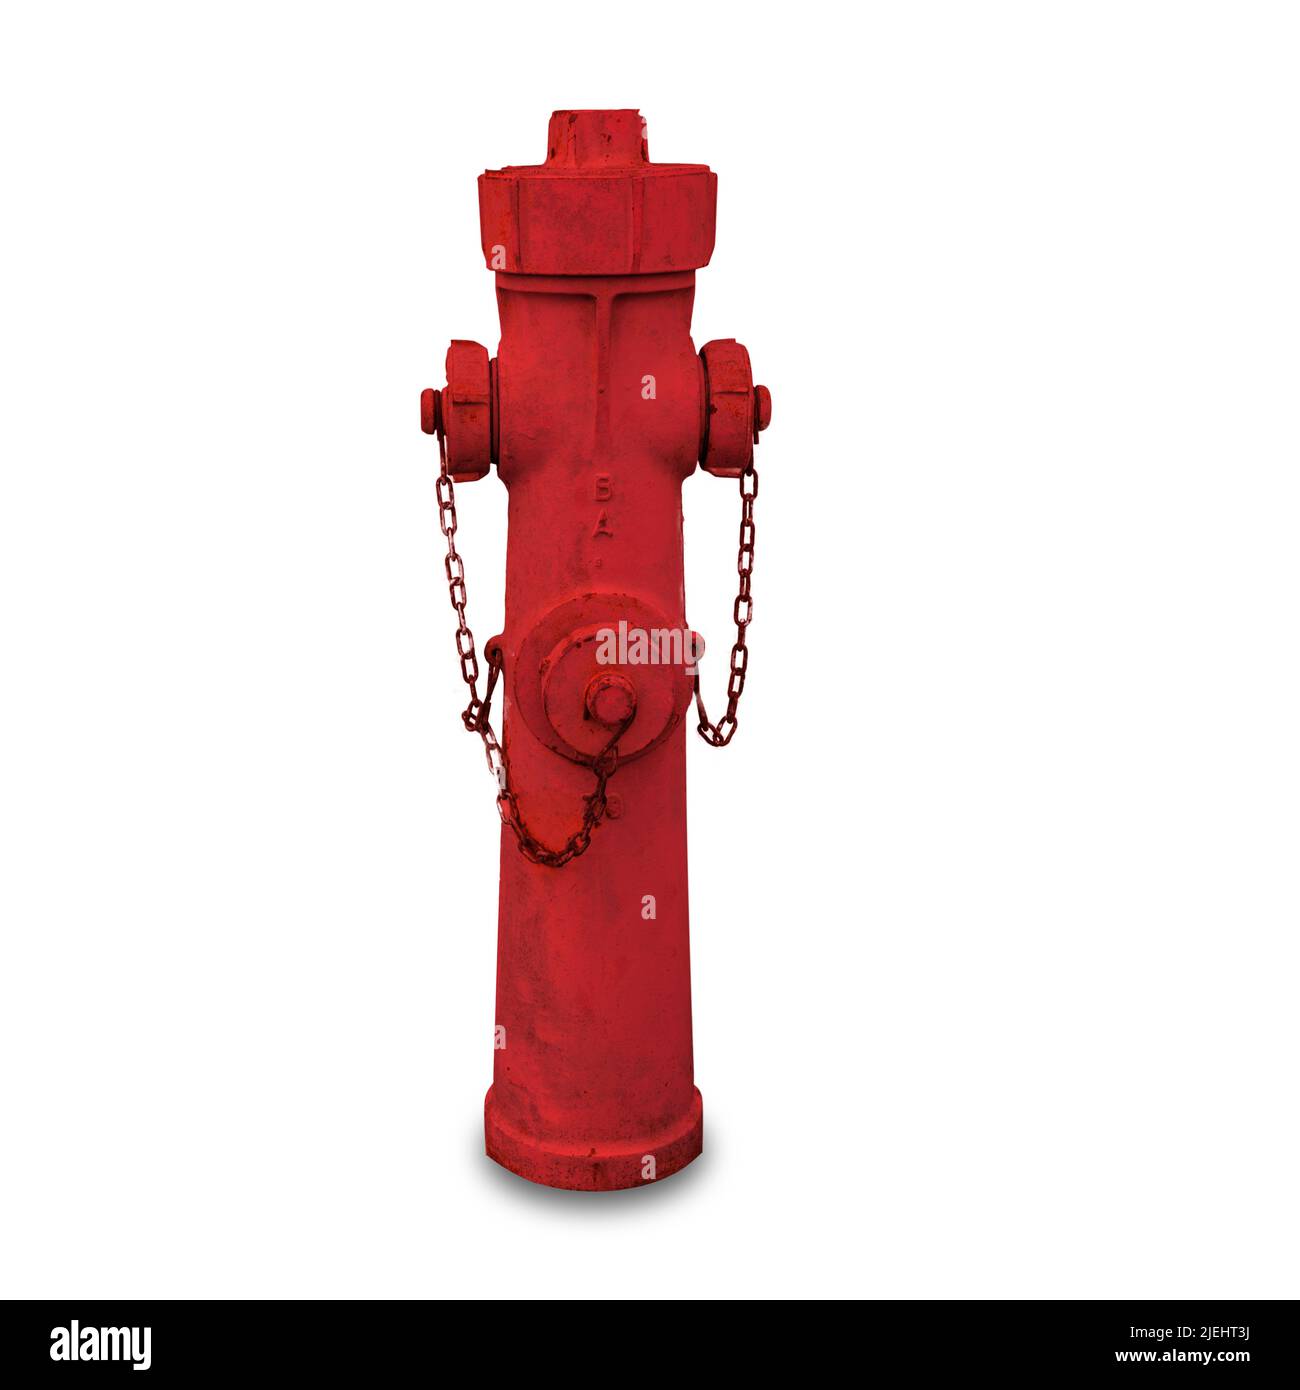 Red fire hydrant isolated on white background, copy space Stock Photo